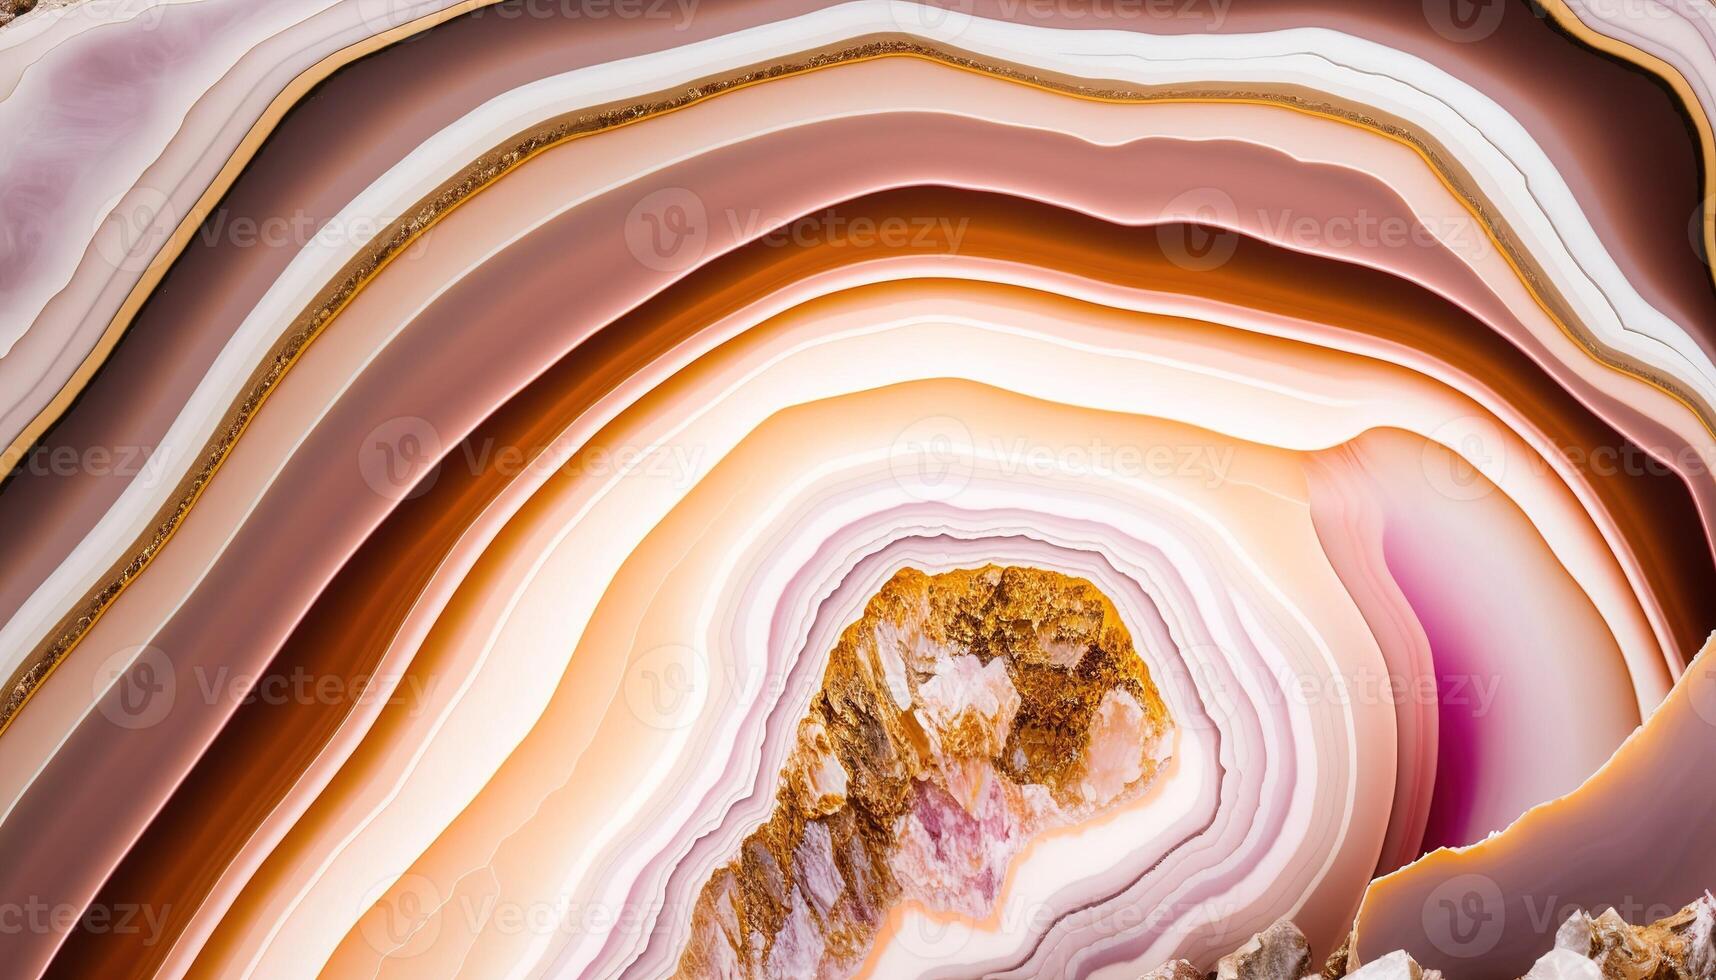 , natural volcanic agate stones close-up light pink magenta and golden texture. Wallpaper background, quartz marble, decorative rock pattern photo